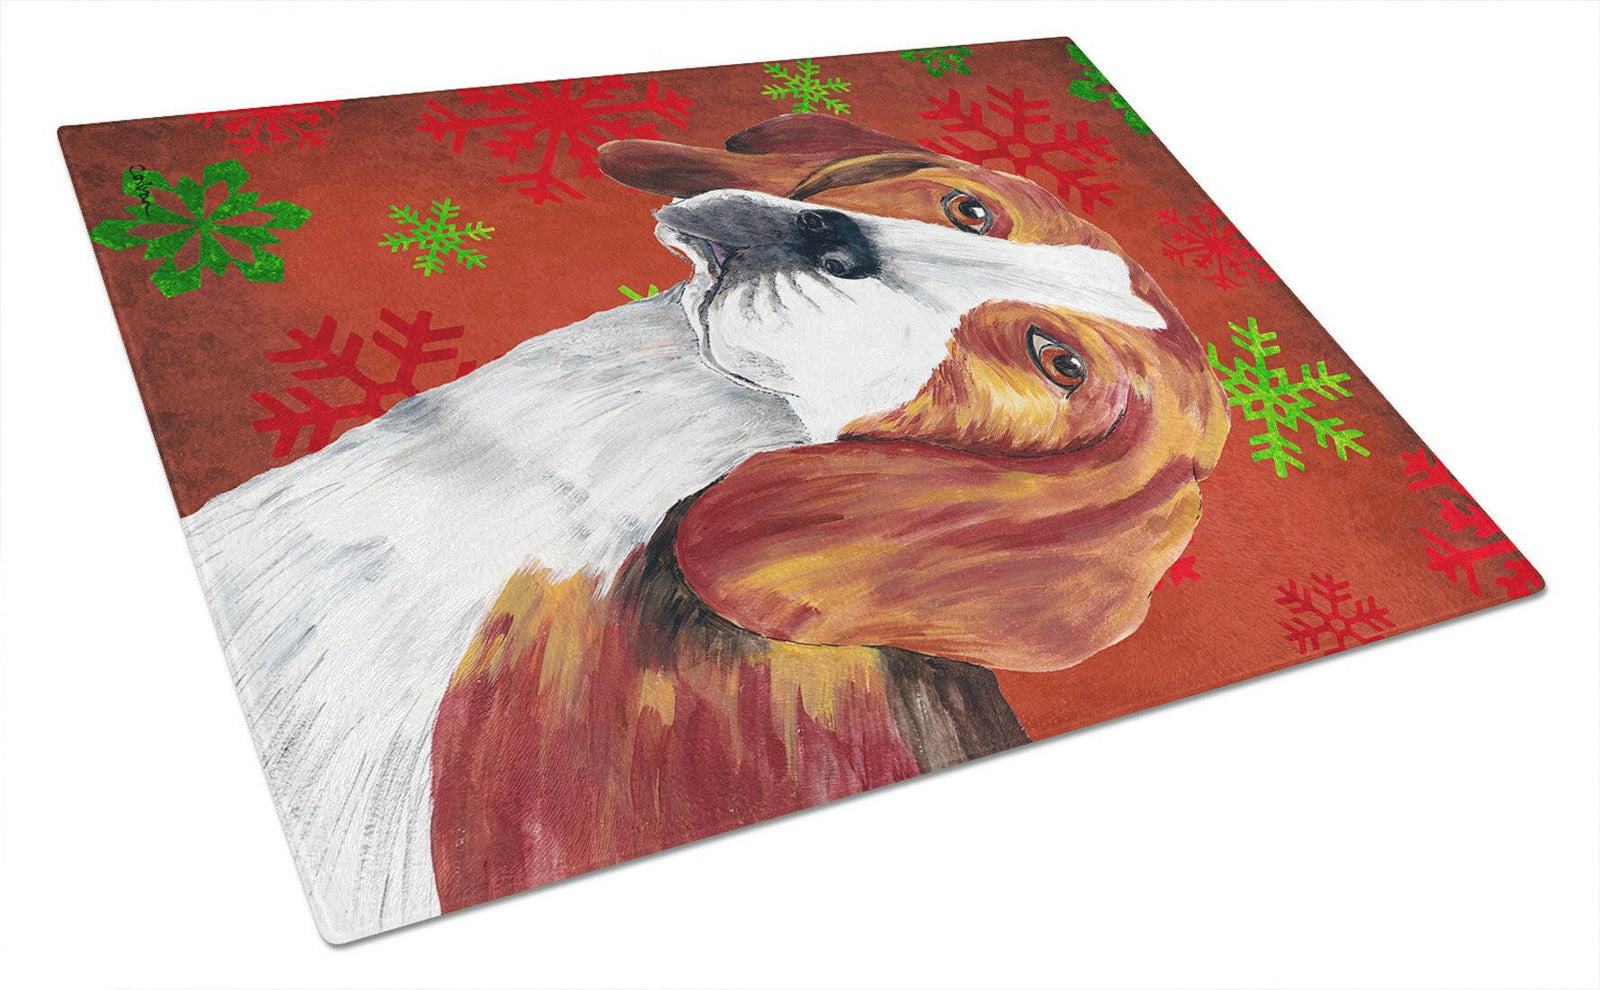 Beagle Red and Green Snowflakes Holiday Christmas Glass Cutting Board Large by Caroline's Treasures